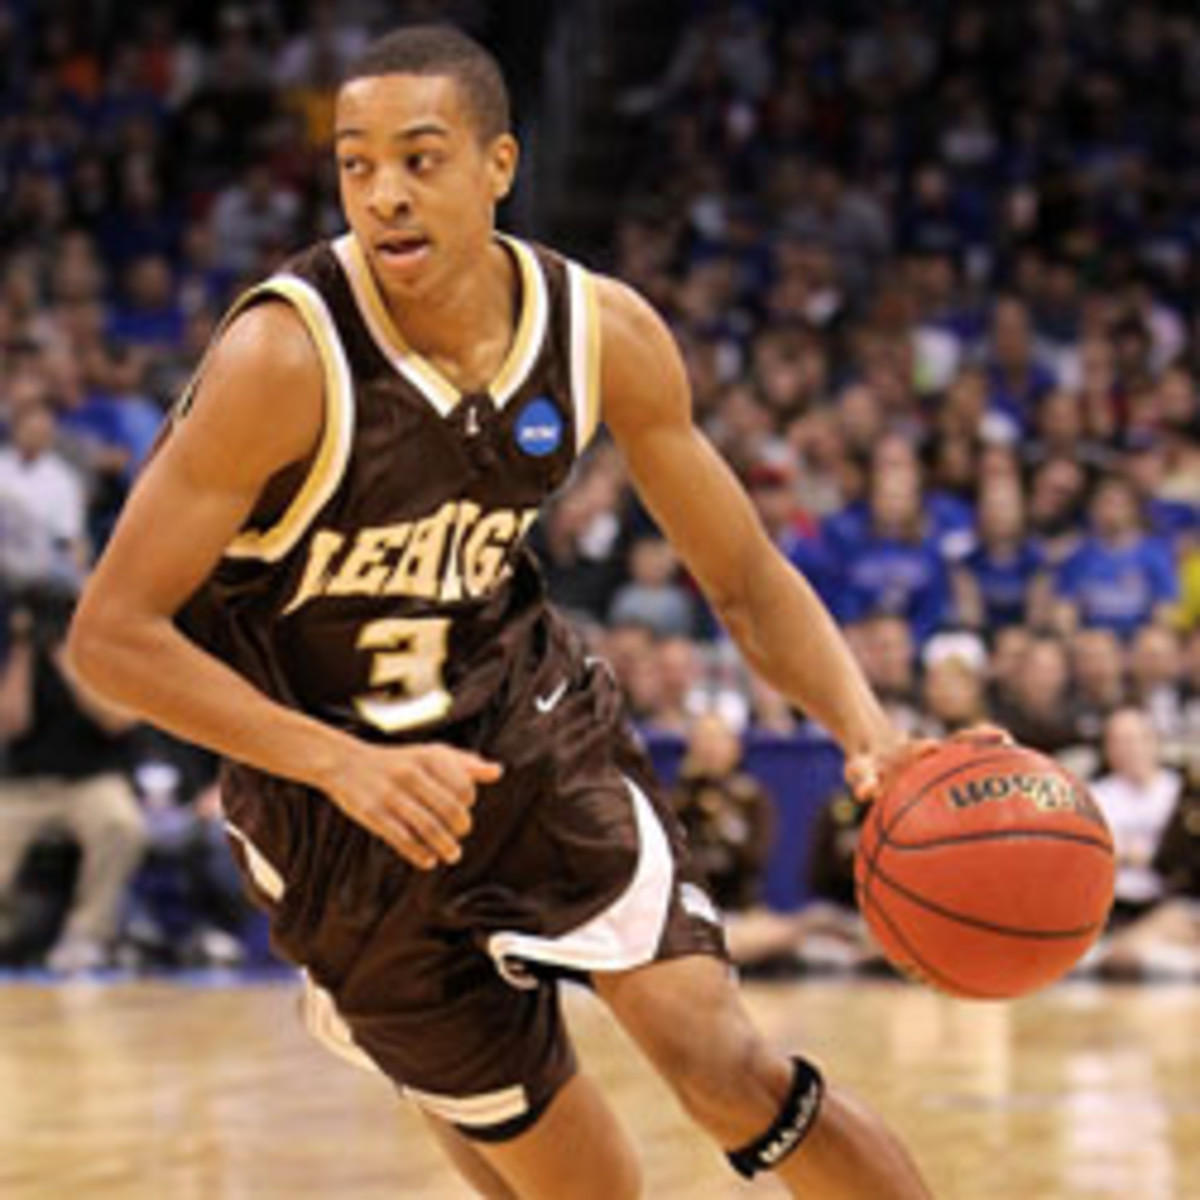 Lehigh's CJ McCollum is "unlikely" to play in the Patriot League tournament. (Ronald Martinez/Getty Images Sport)